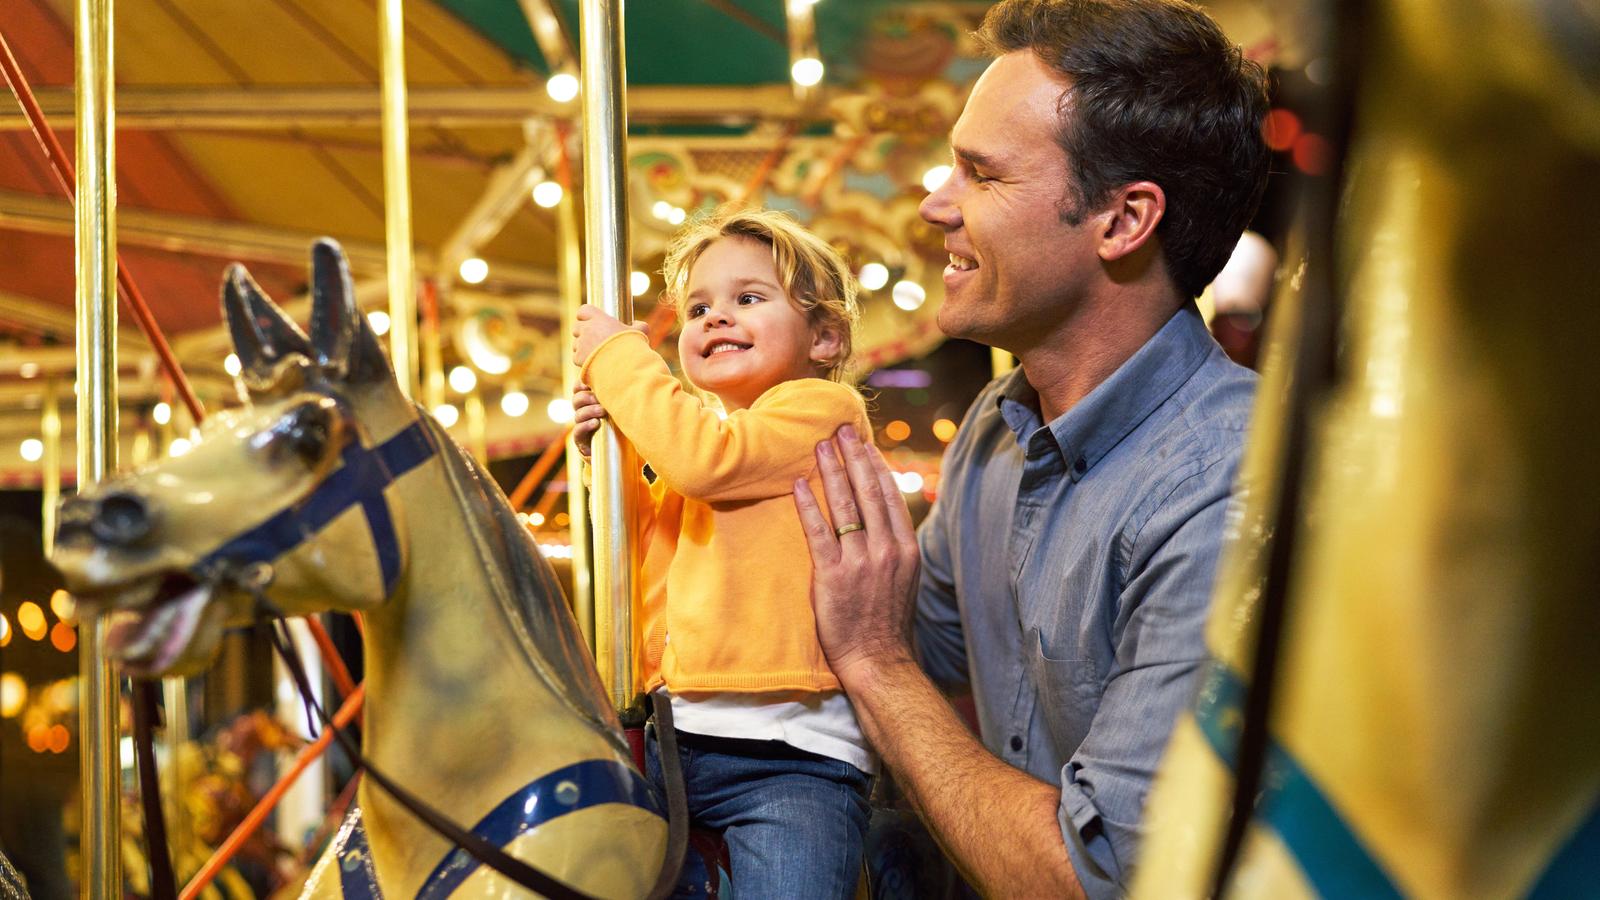 A man holds a child riding on a carousel